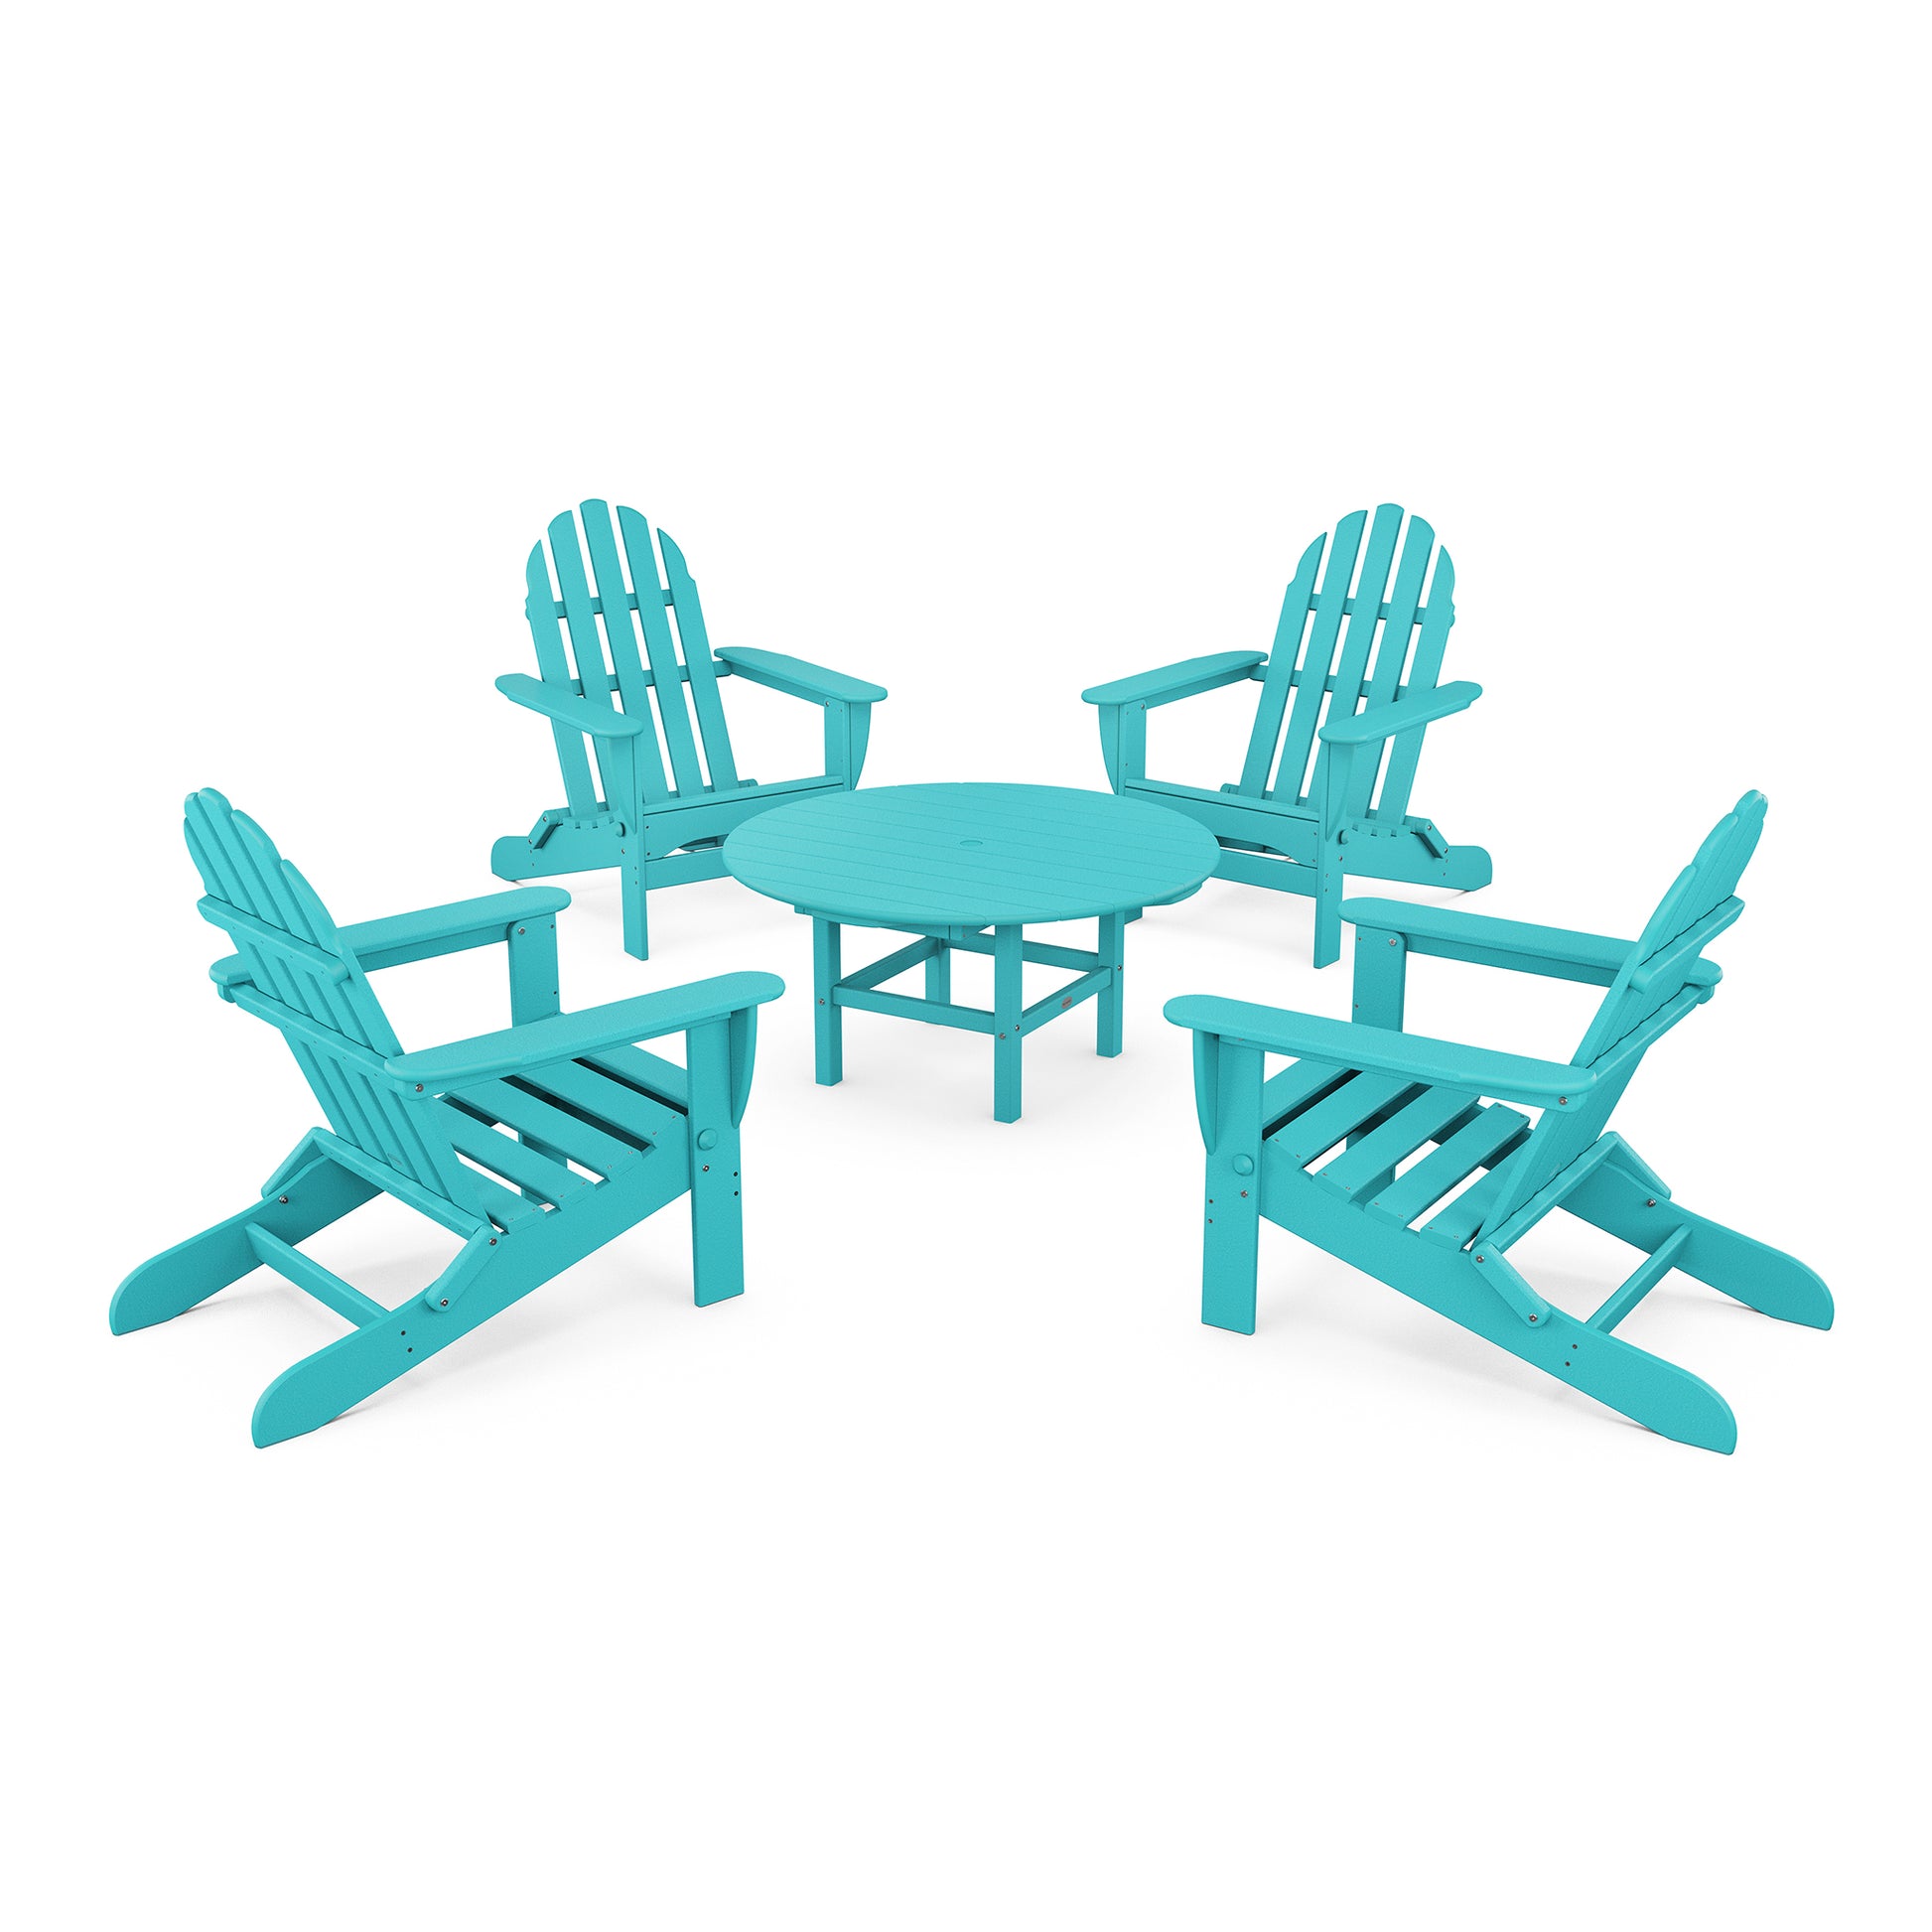 Four POLYWOOD Classic Folding Adirondack chairs in bright teal color positioned around a matching circular table, set against a plain white background. The furniture, designed as a classic conversation set, features a sl